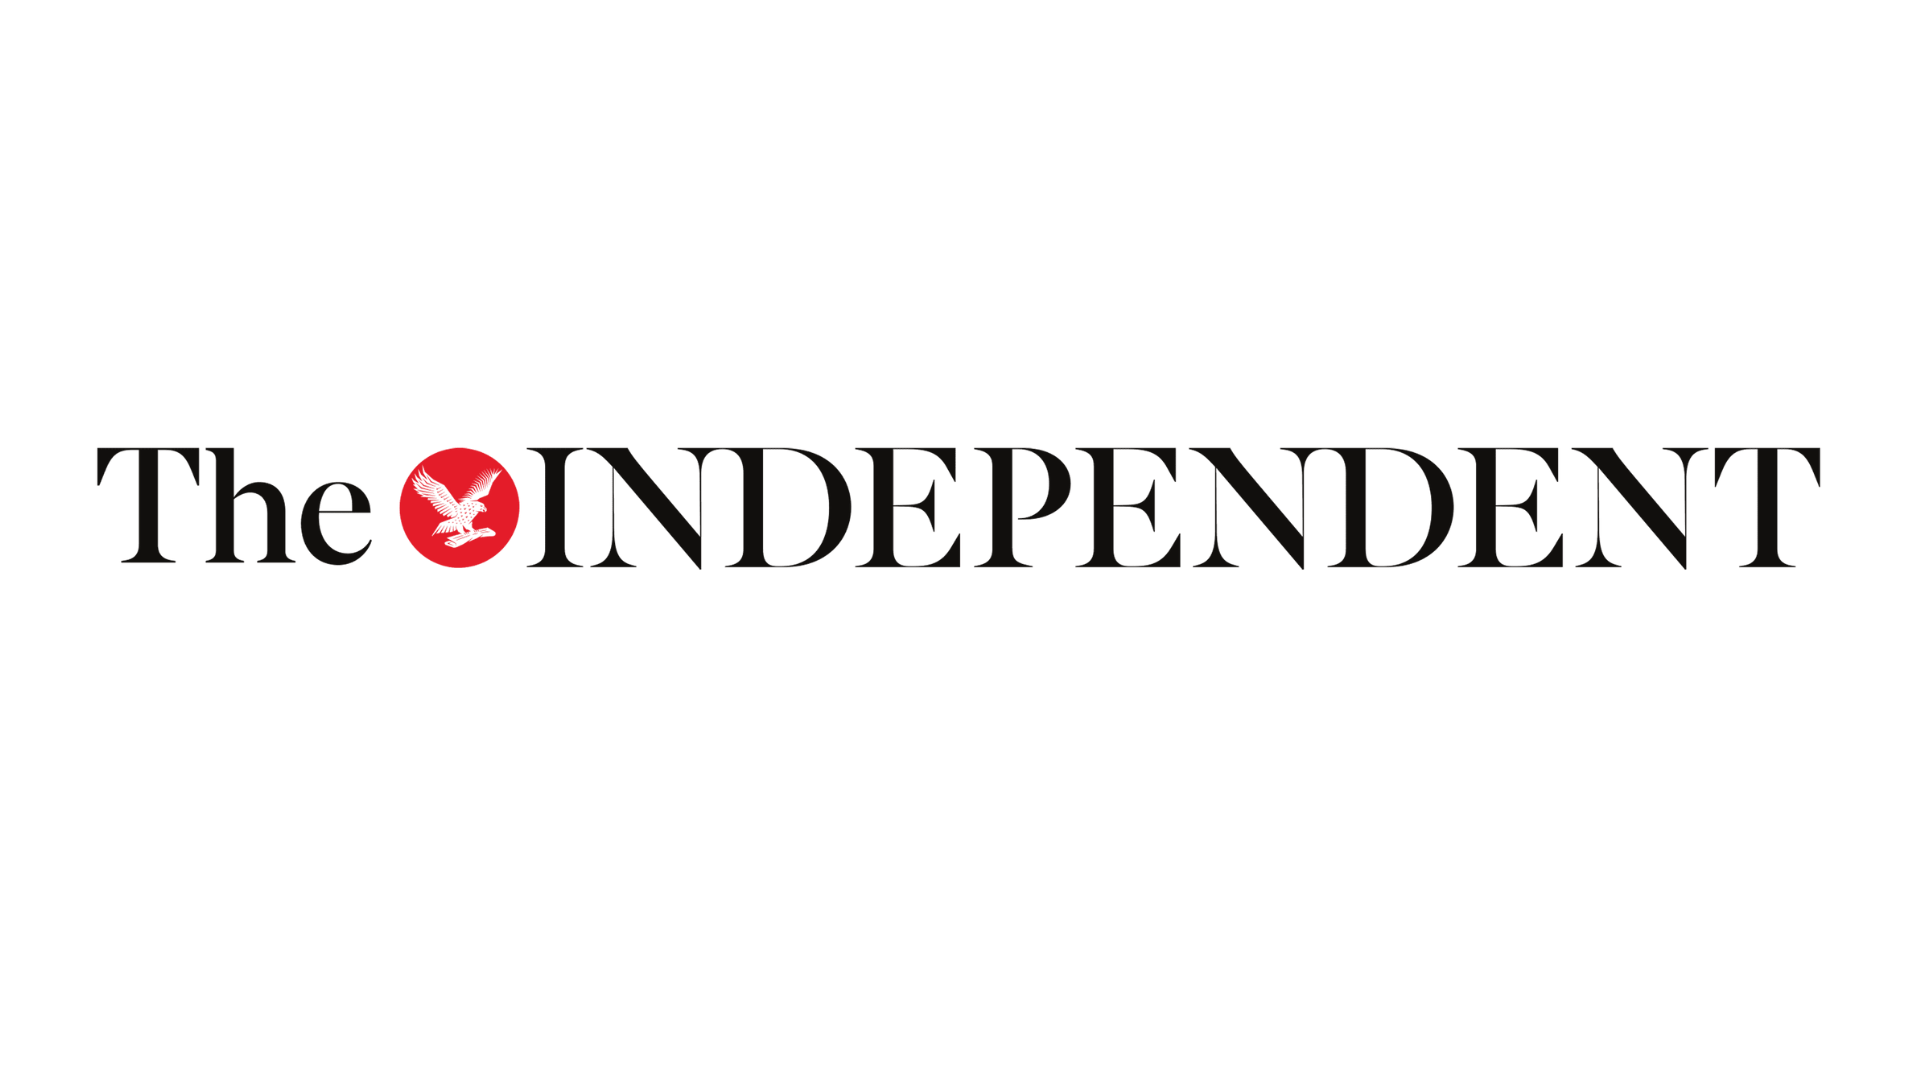 The Independent - Damian Browne